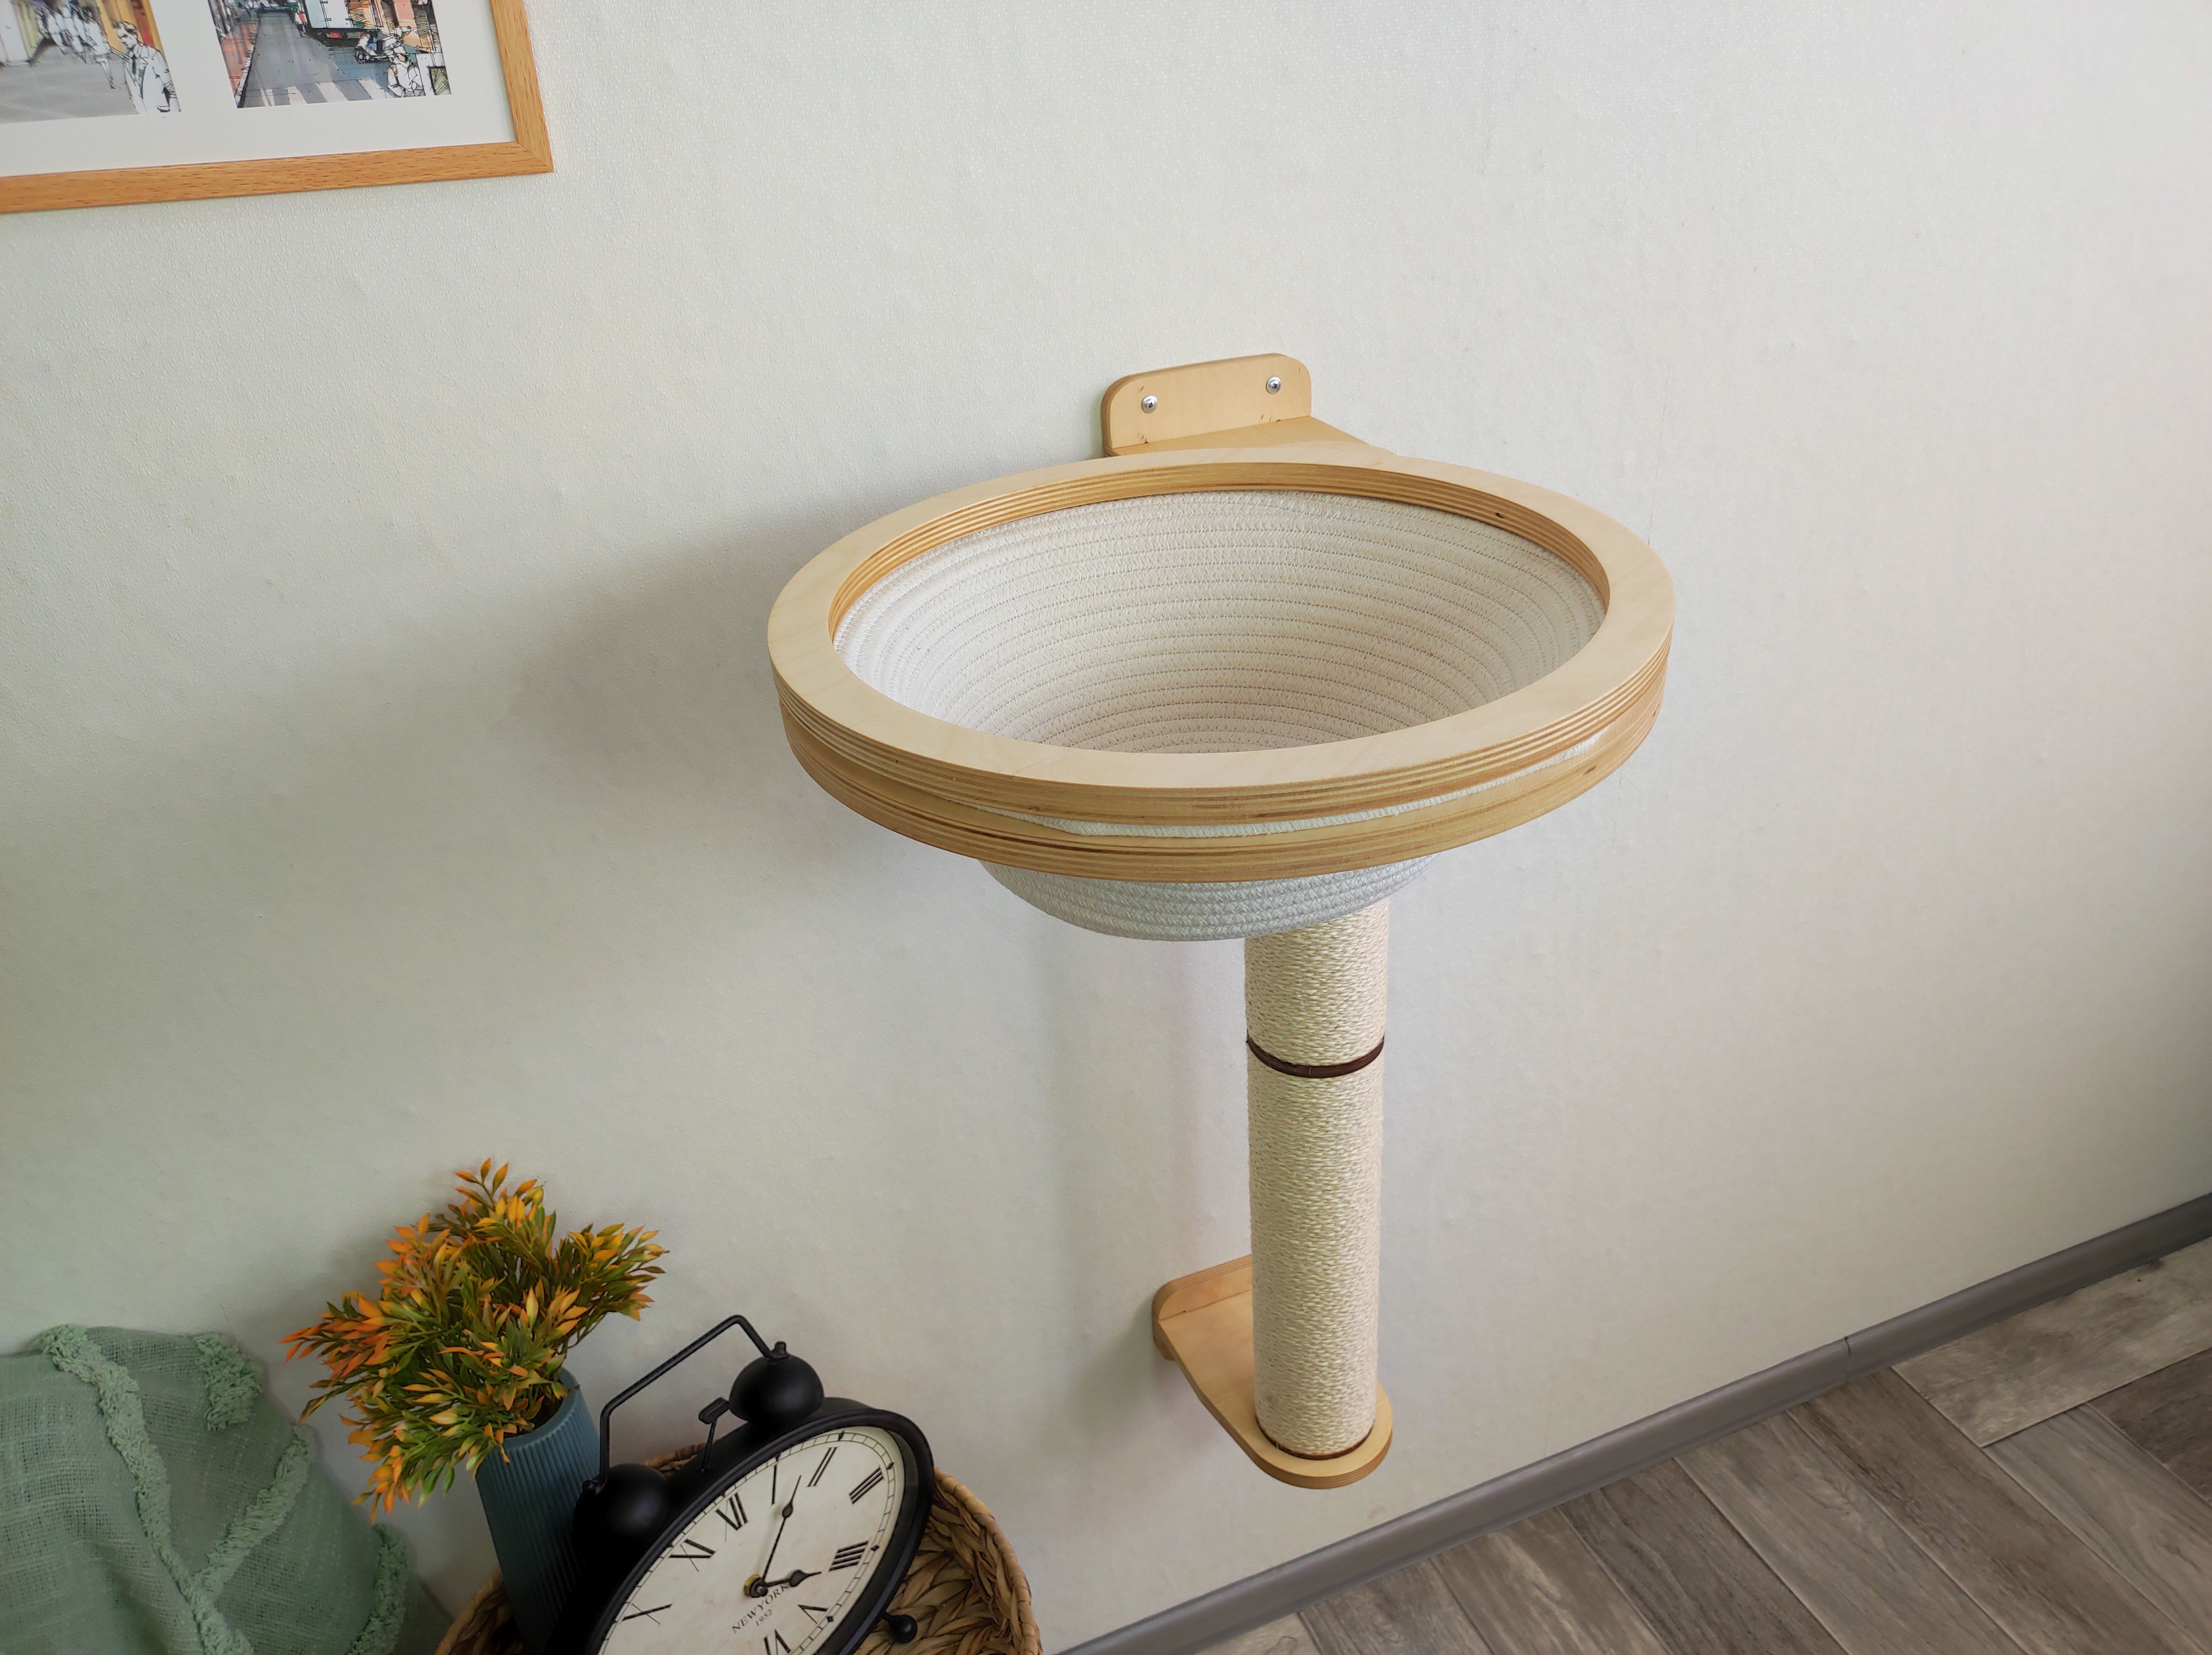 Round wall-mounted basket made of cotton thread with a cat bowl